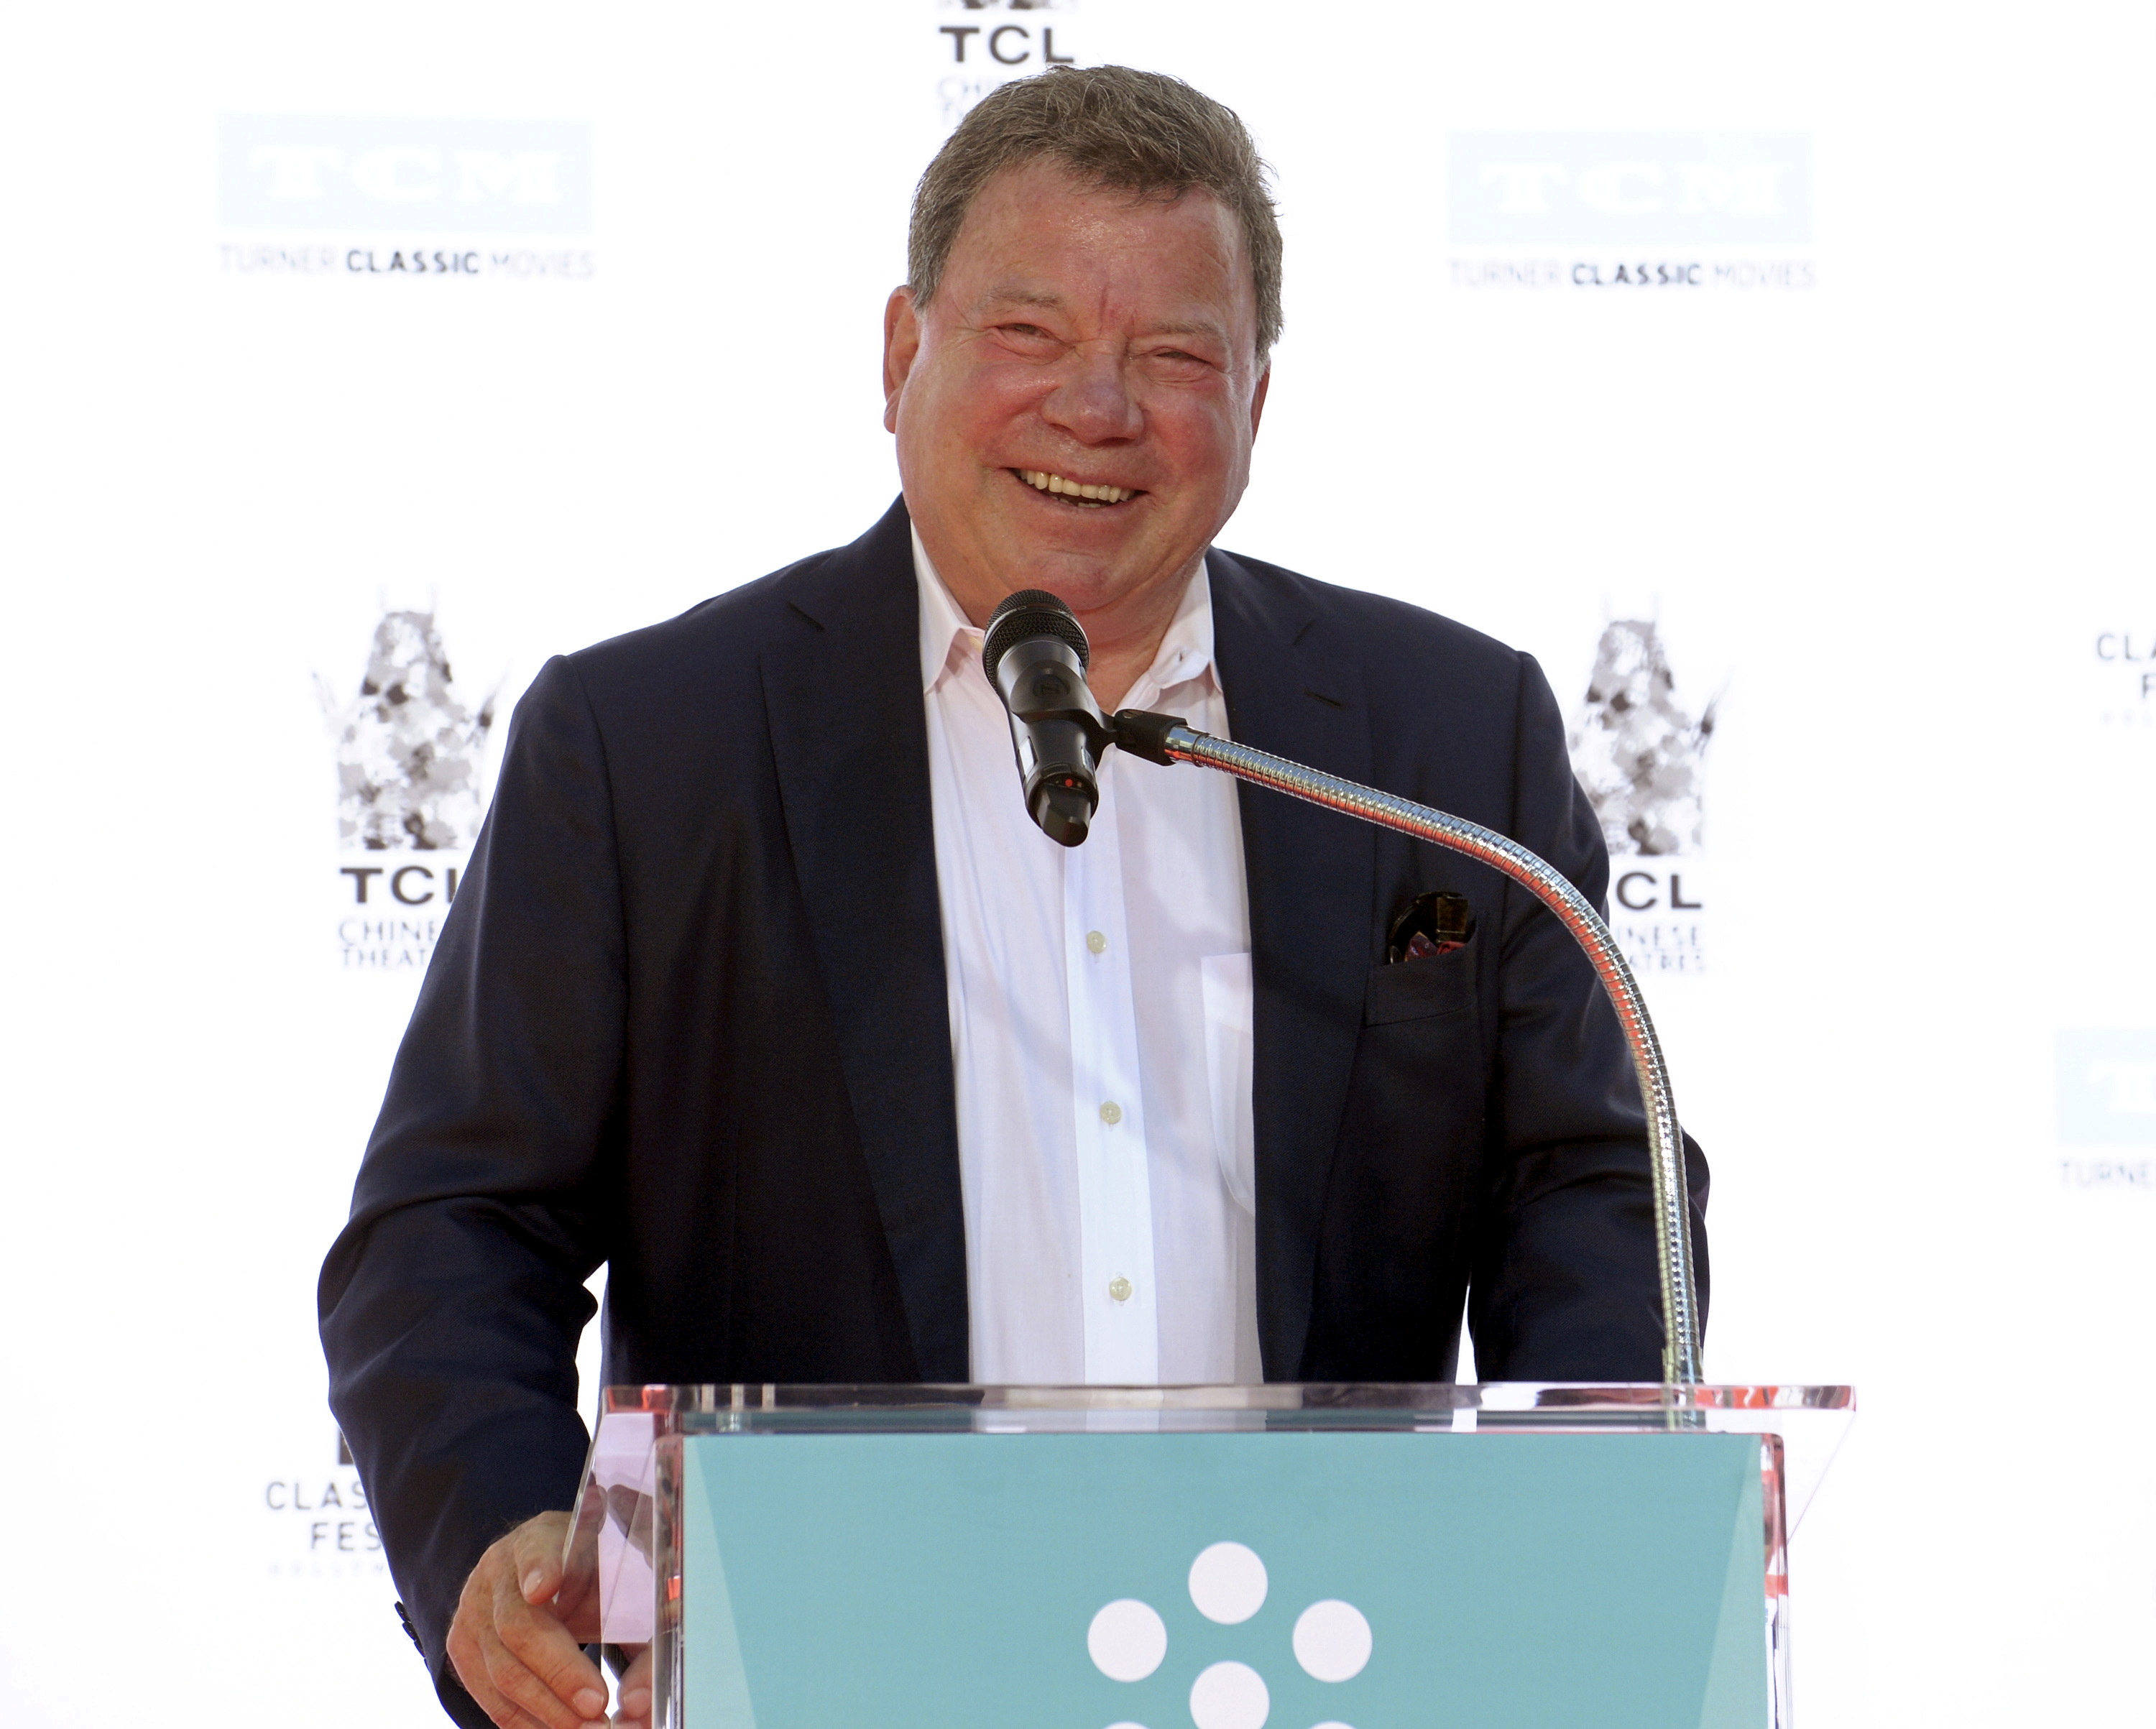 Actor Shatner speaks during a handprint and footprint ceremony honoring actor Plummer at the TCL Chinese Theatre in Los Angeles